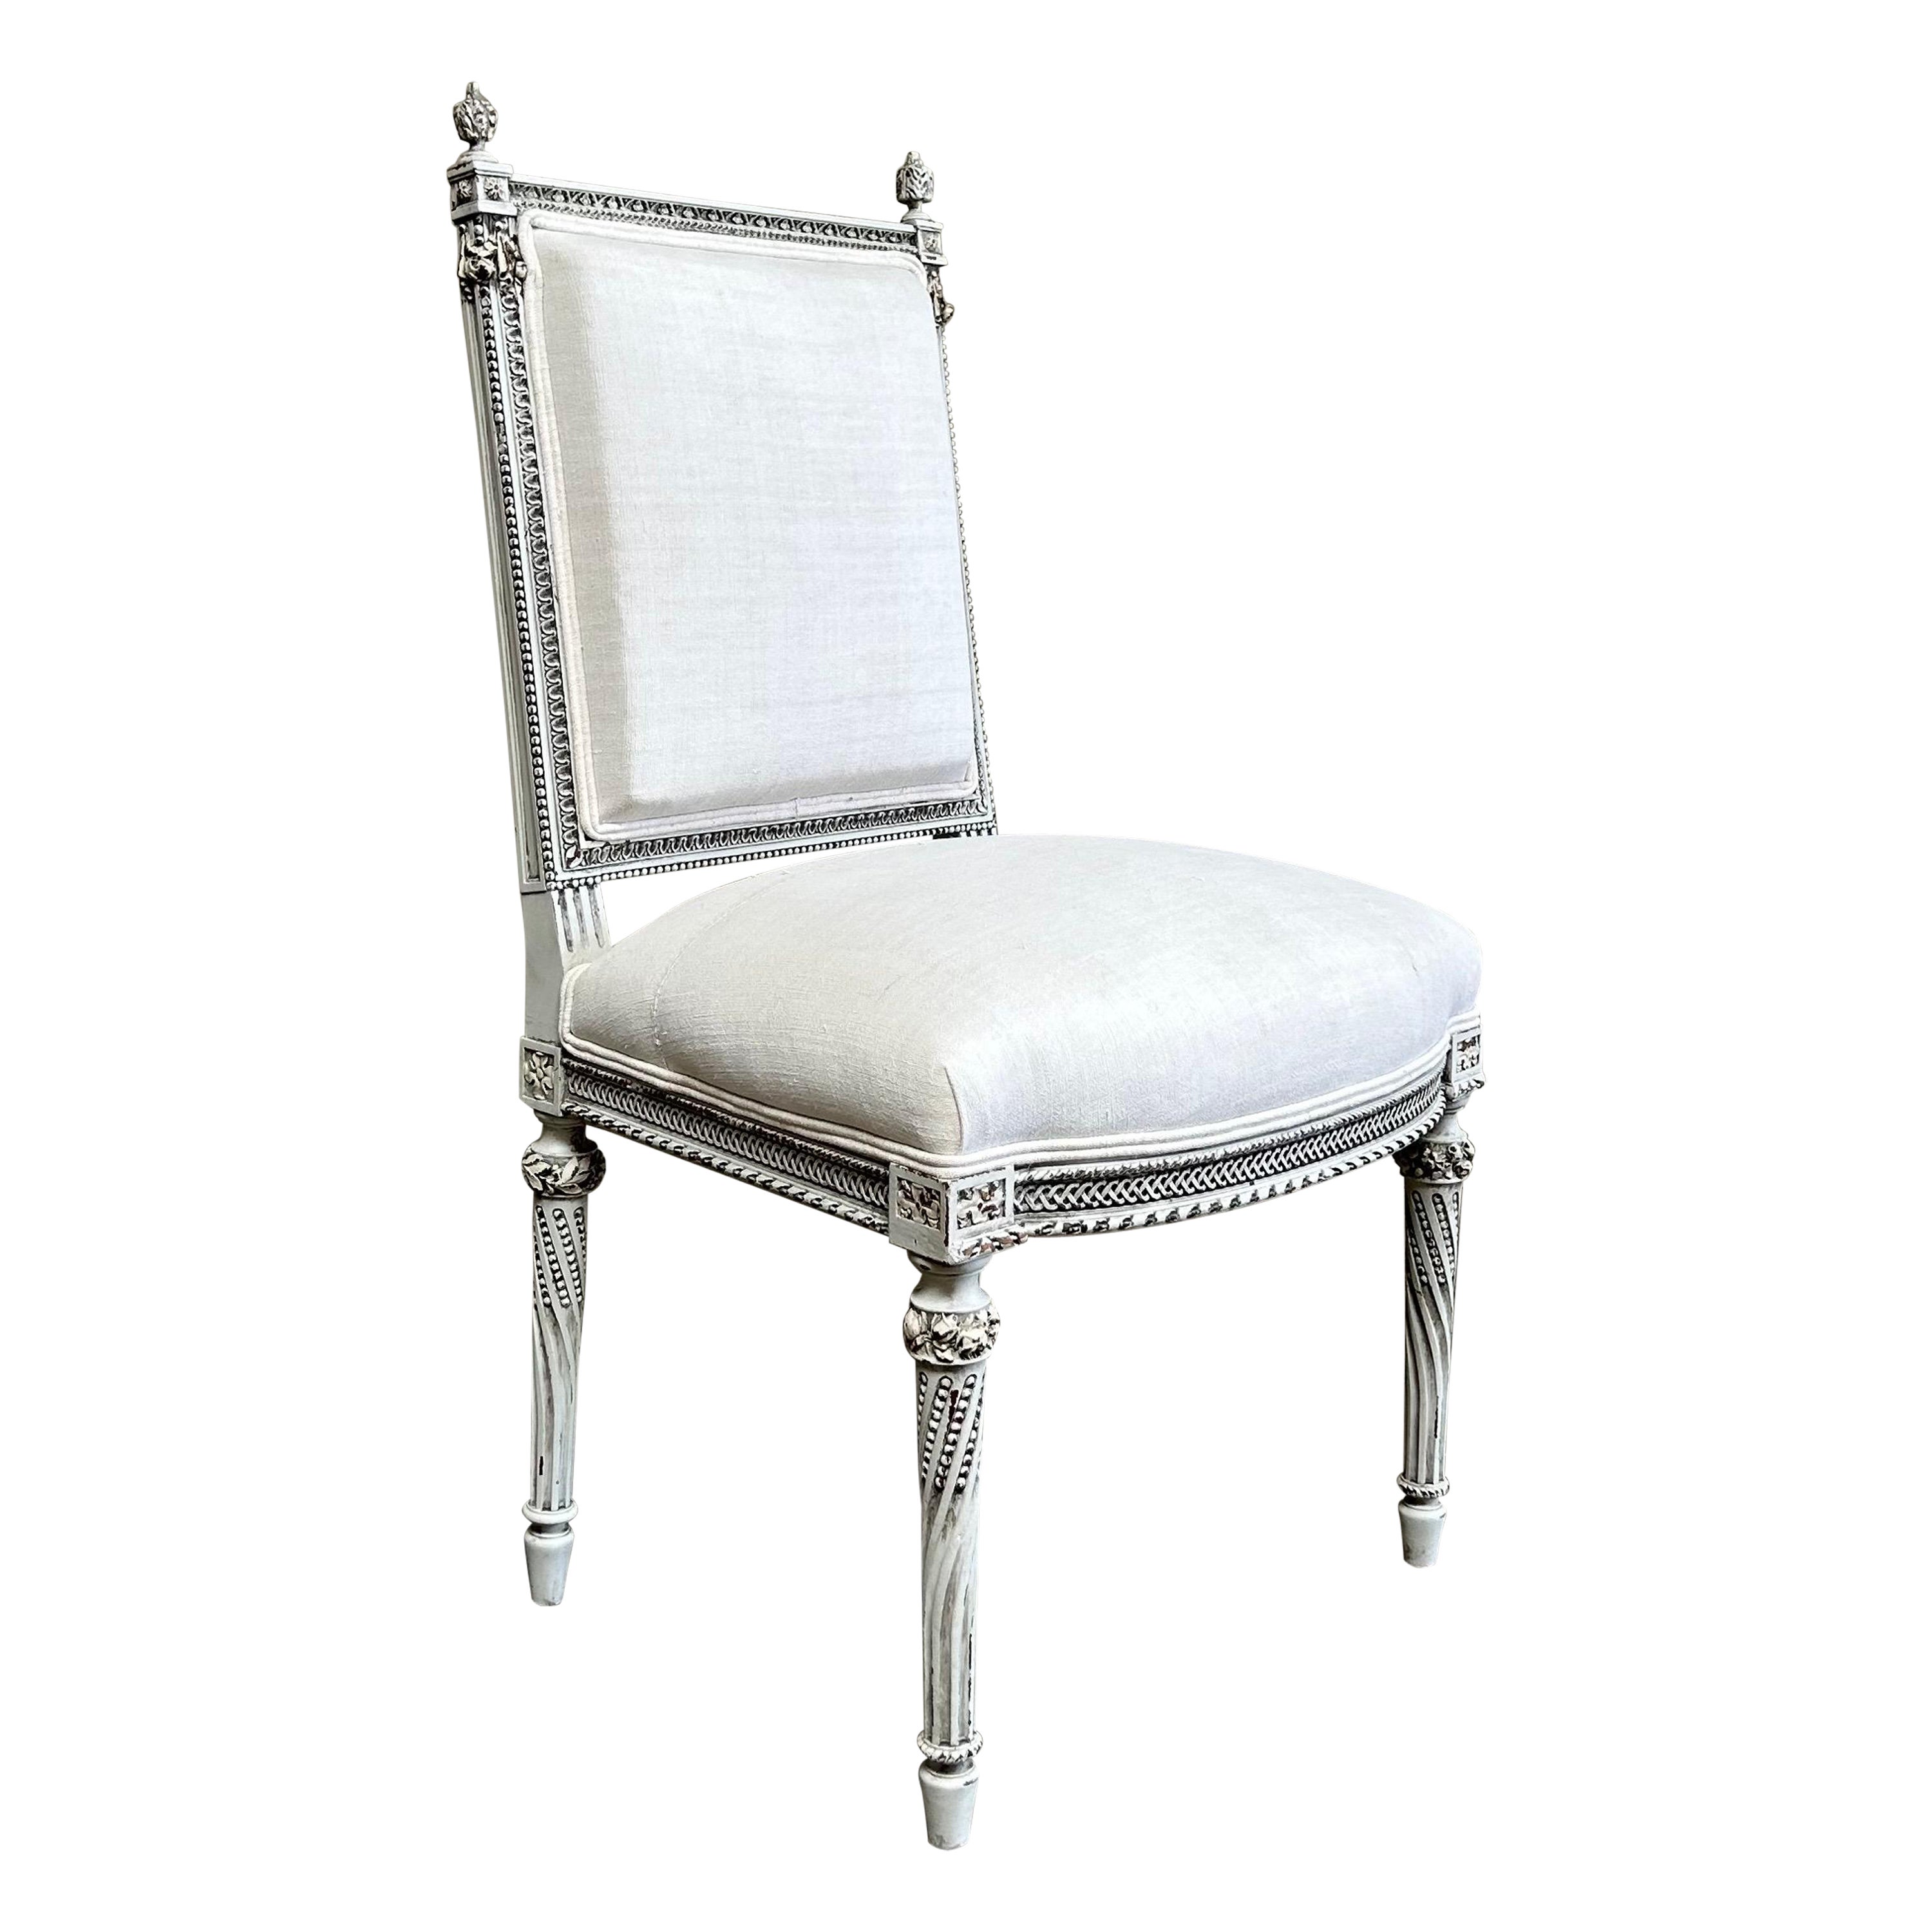 Vintage Louis XVI Style Painted and Upholstered chair